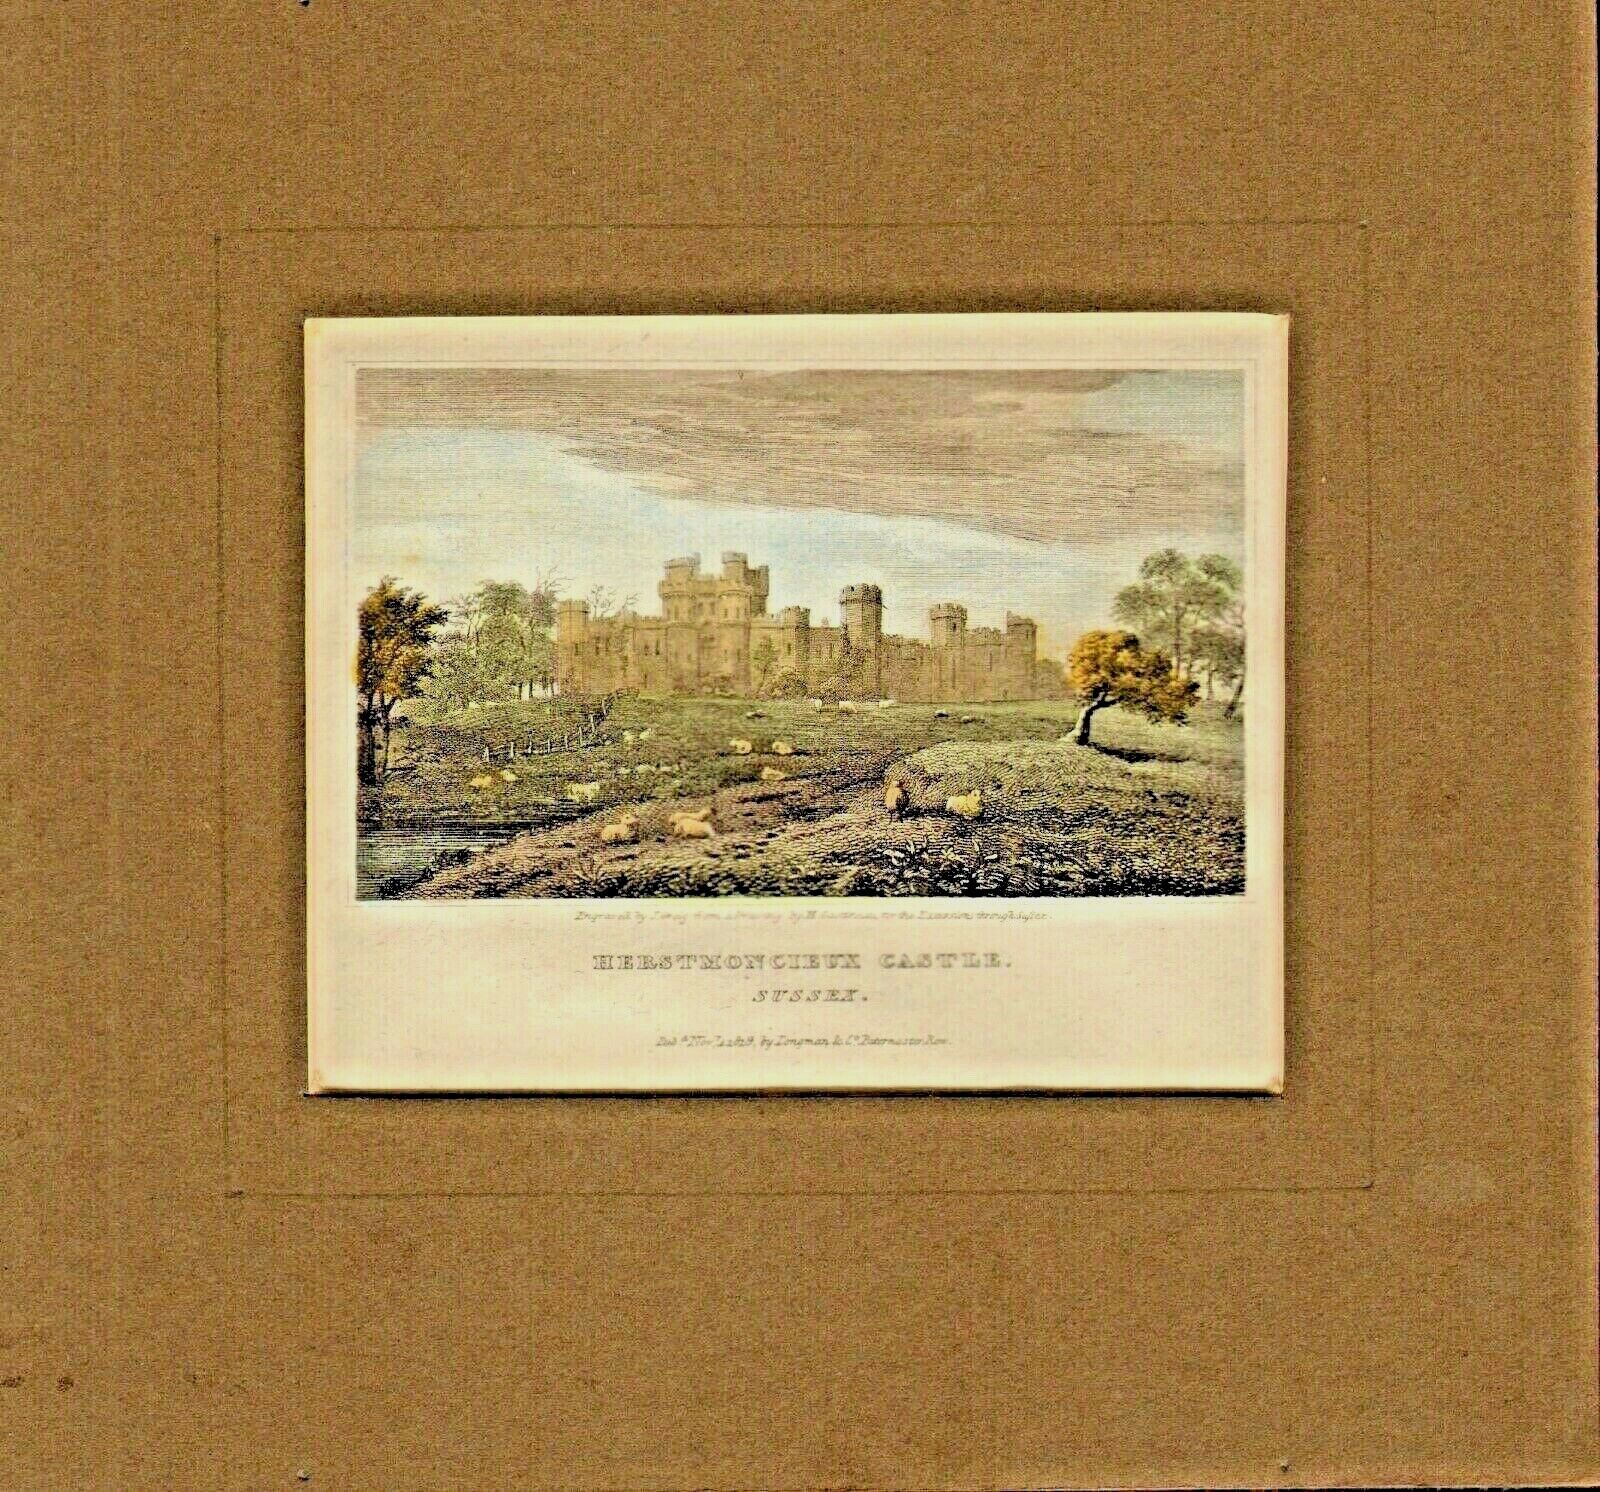 1819 hand colored mounted engraving - herstmoncieux castle .sussex